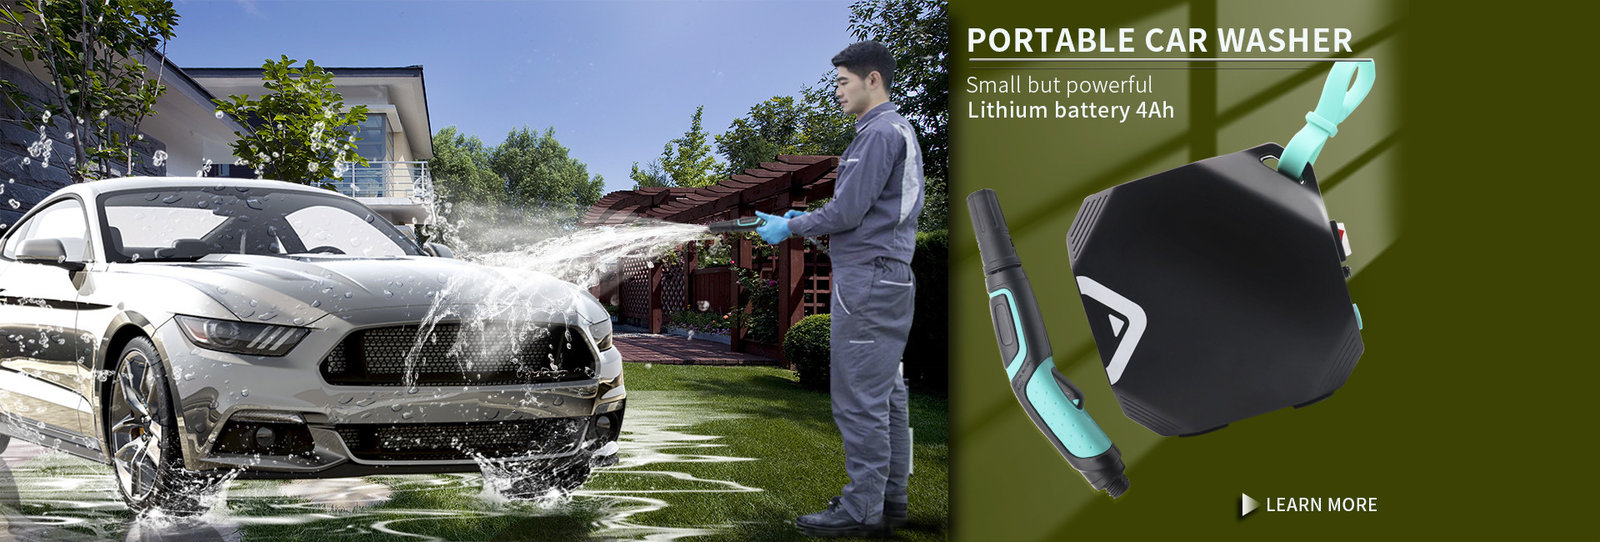 new model high pressure car pressure washer machine with lithium batterry for car wash factory supplier